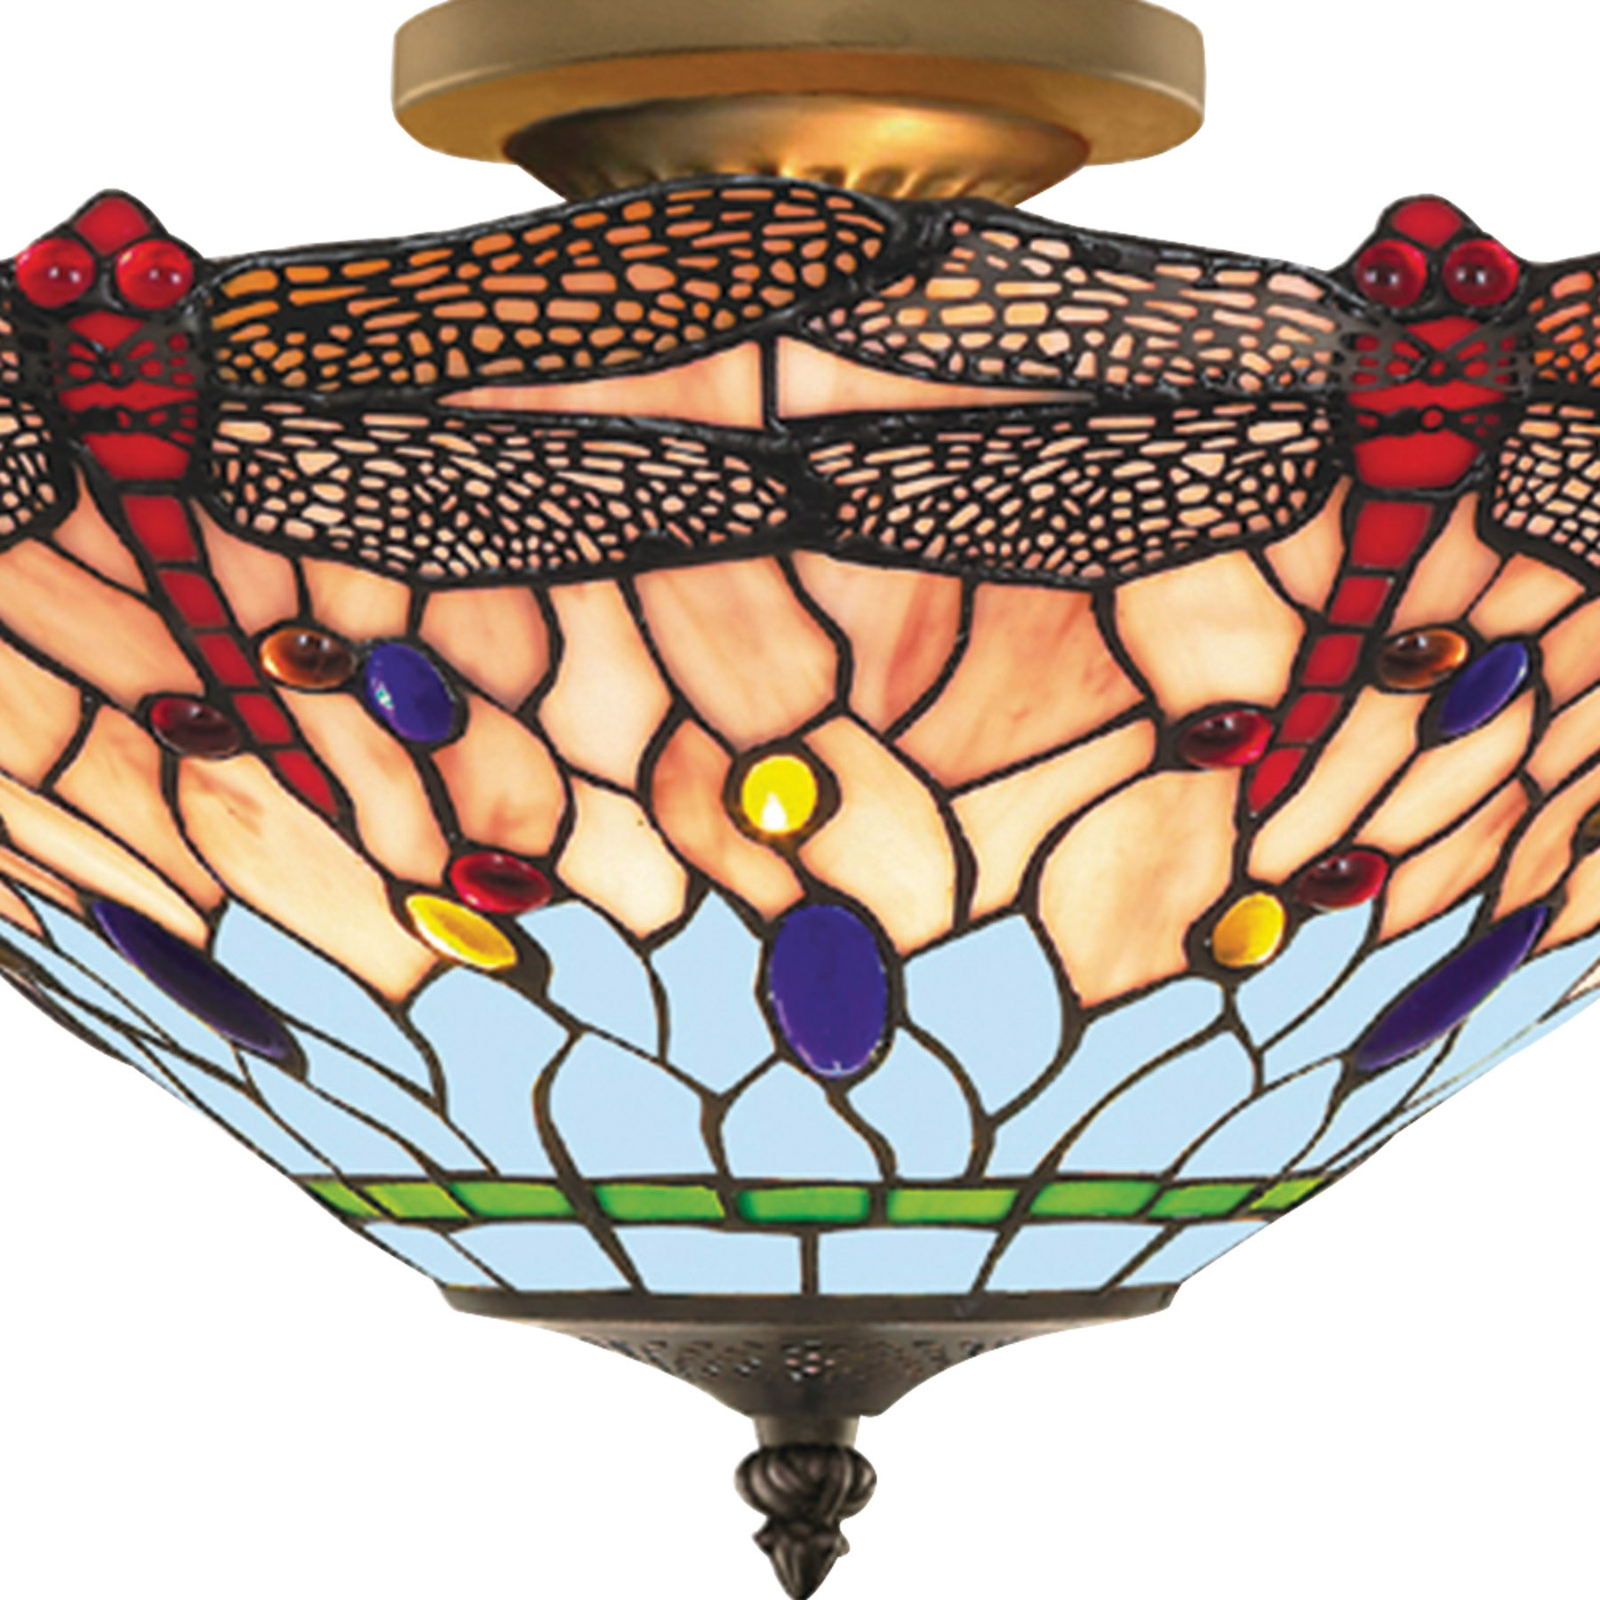 Dragonfly ceiling light in Tiffany style